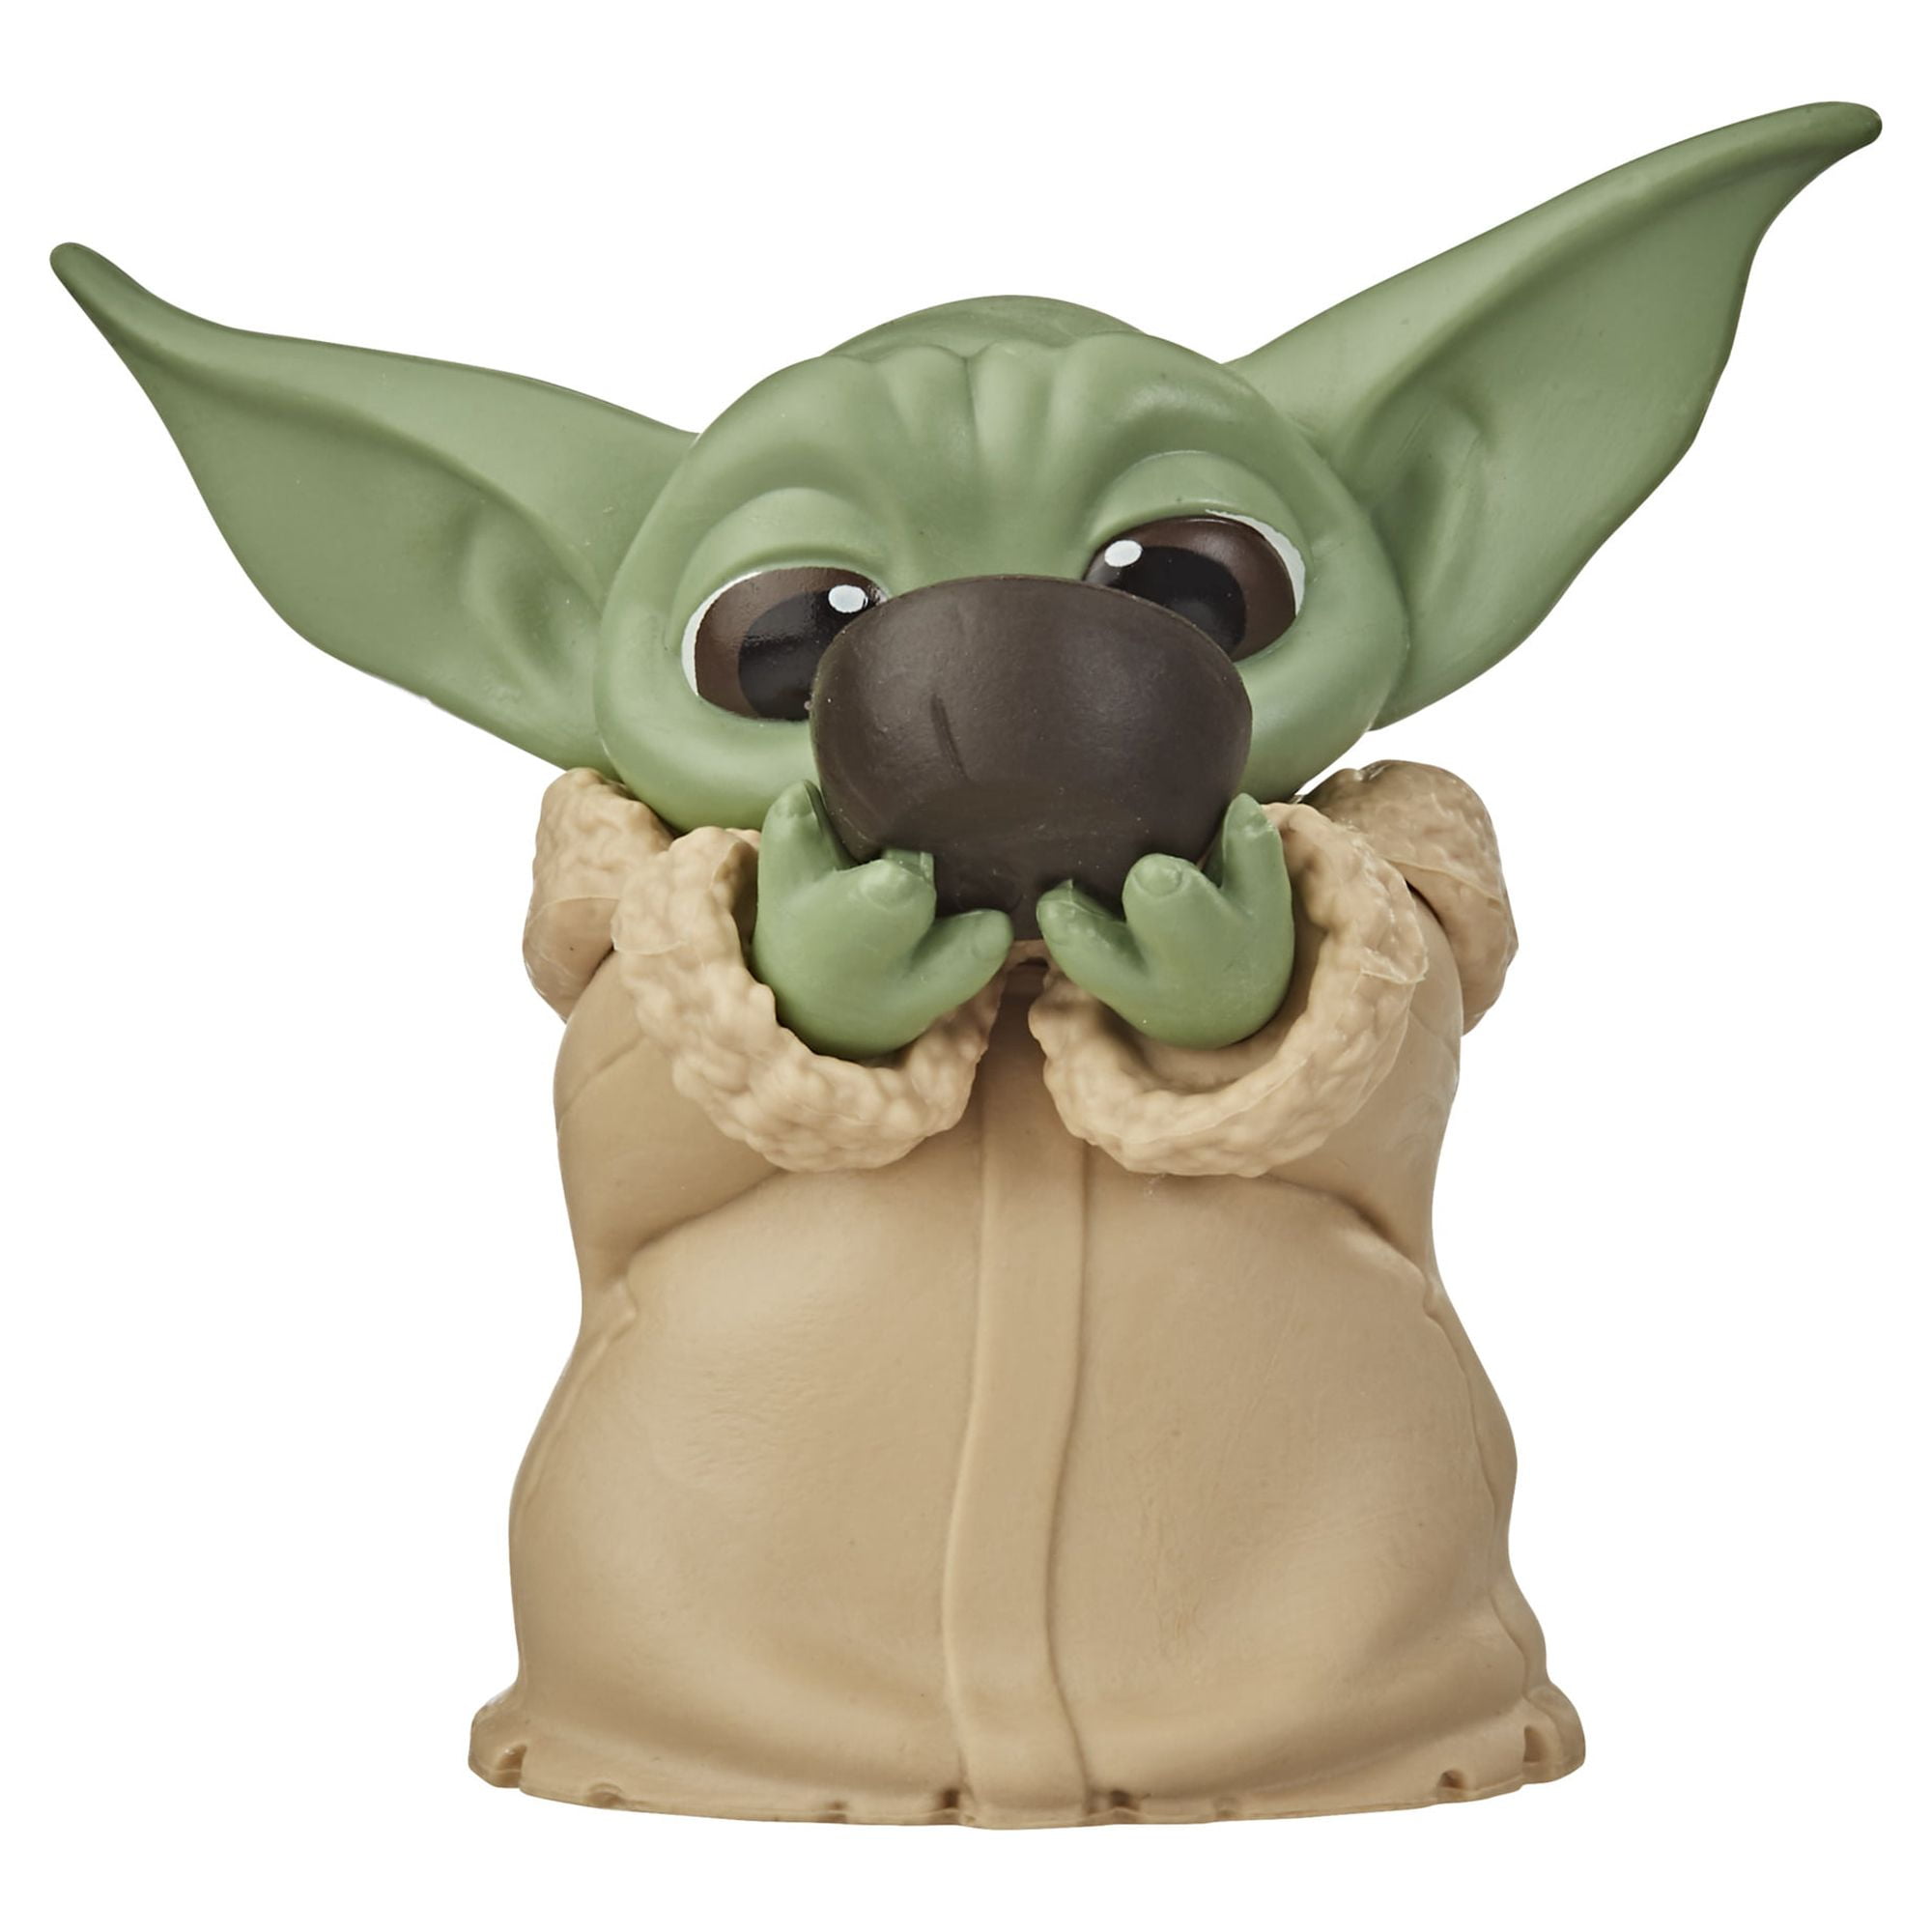 Buy Trunkin Baby Yoda Doll Gift Toys 2-2.4 inch Mandalorian Yoda Baby  Action Toys 6Pcs/Set Star Wars Yoda Figures?Figurines Online at Low Prices  in India 